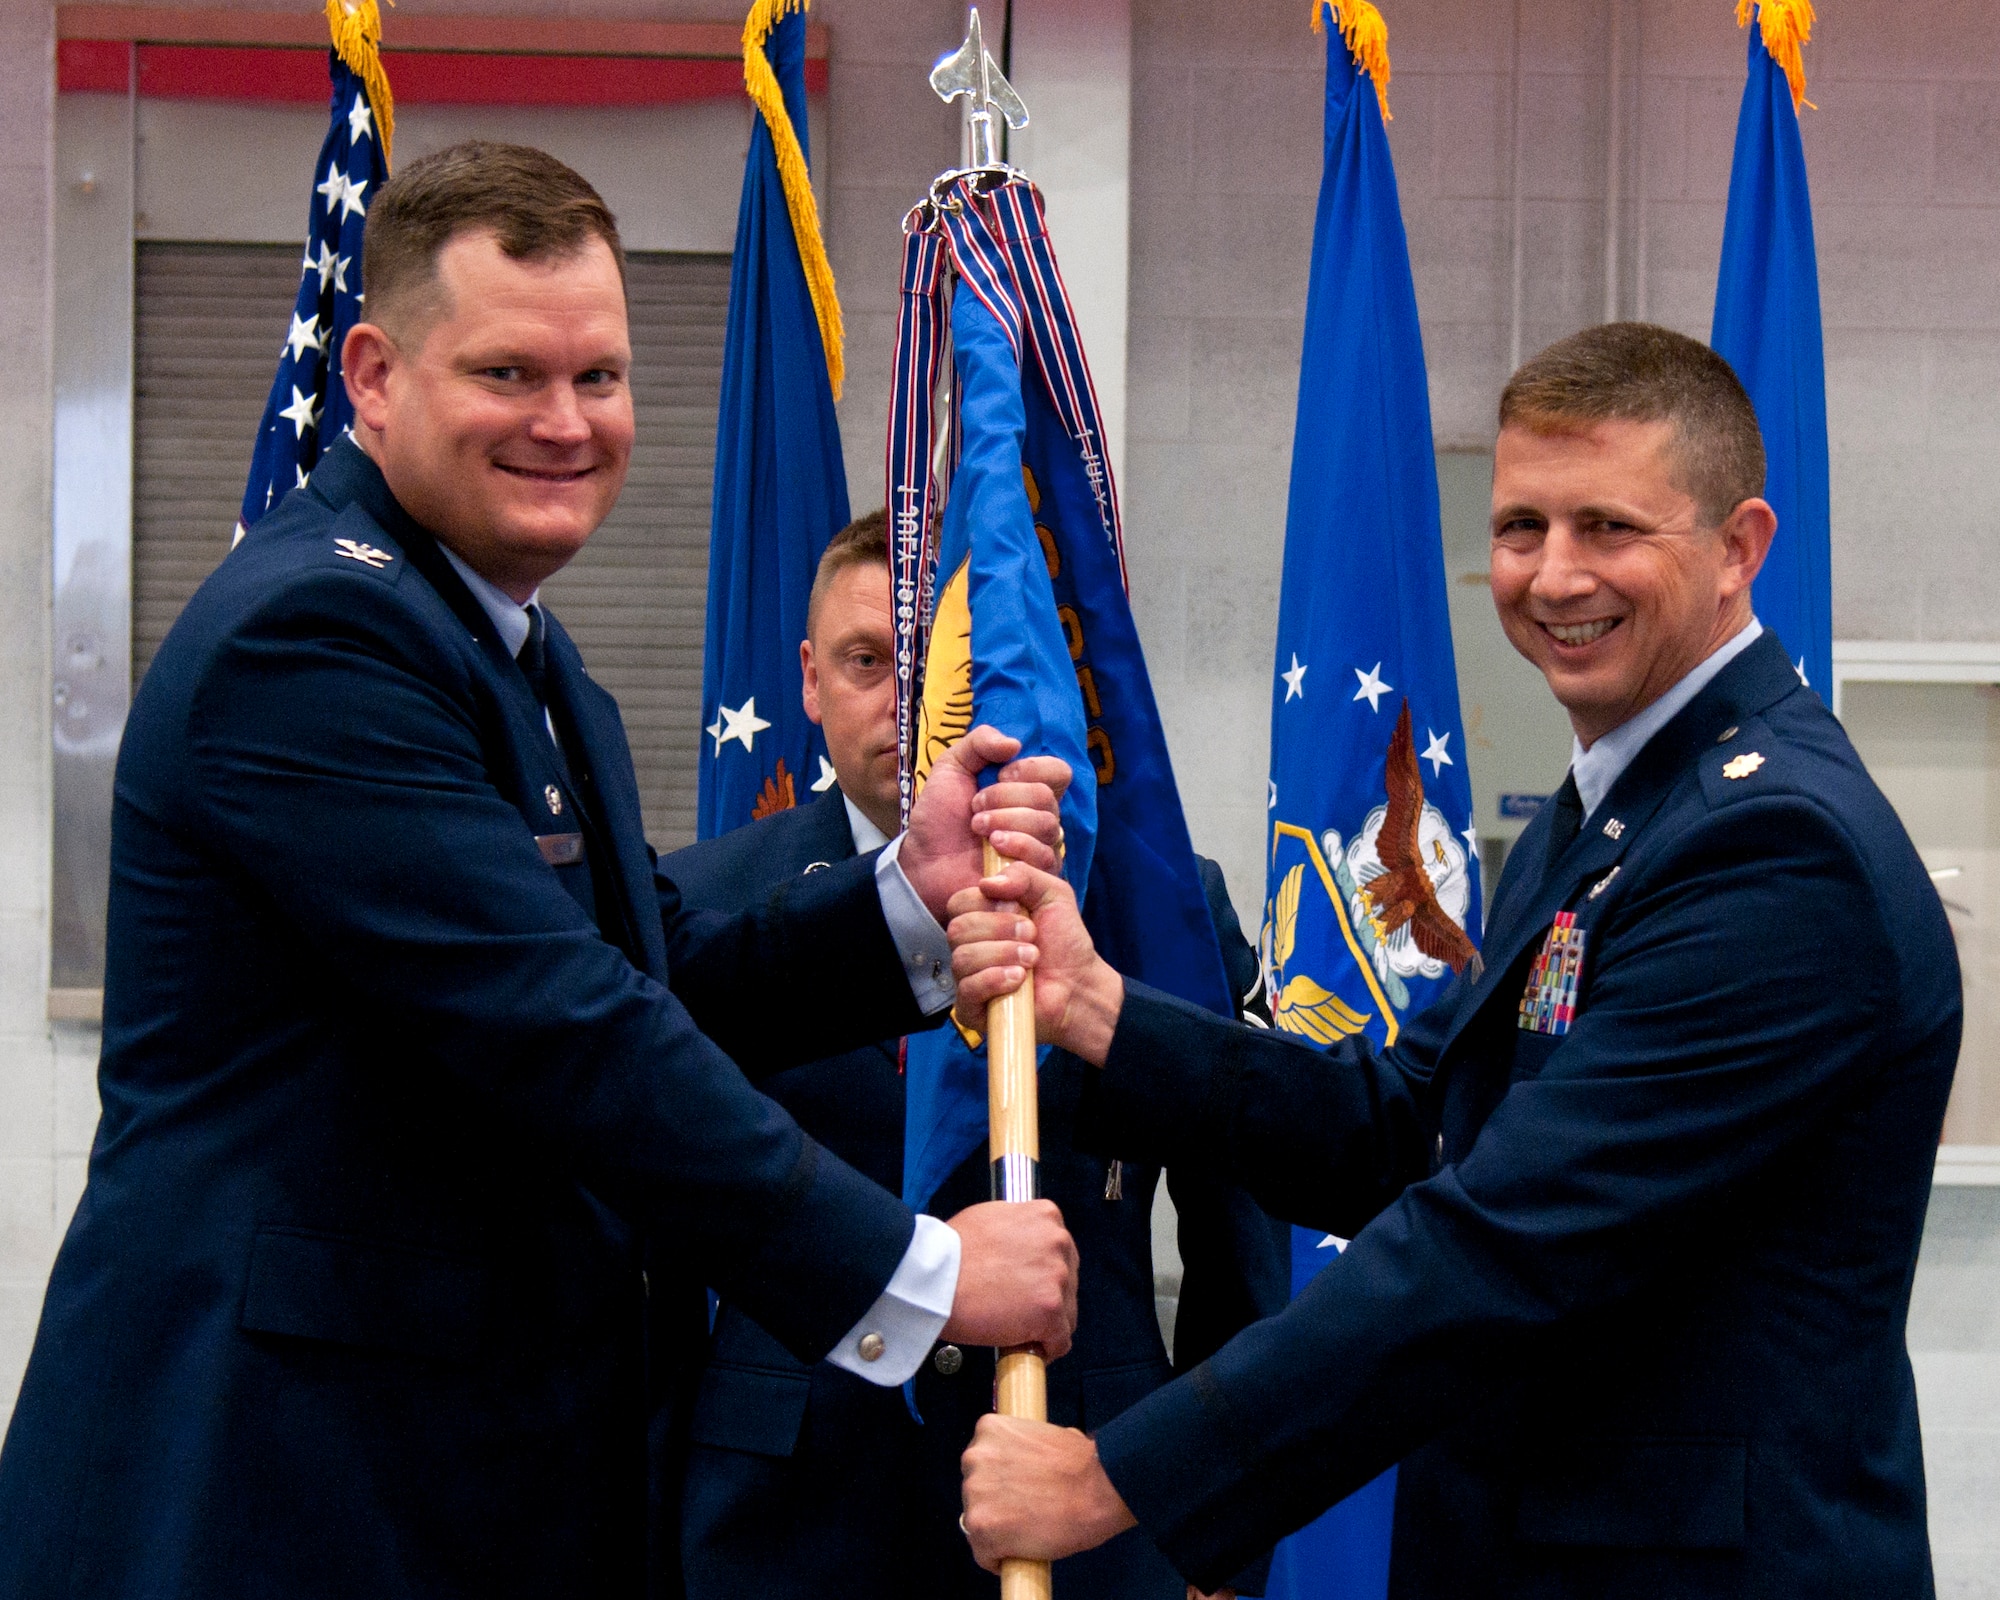 Col. Craig Allton, 90th Security Forces Group commander, passes the guidon to Maj. James Hughes, 90th Missile Security Forces Squadron commander, during the 90th MSFS change of command ceremony June 15, 2015, at F.E. Warren Air Force Base, Wyo. The ceremony signified the transition of command from Lt. Col. Peter Lex to Hughes. (U.S. Air Force photo by Airman 1st Class Malcolm Mayfield)